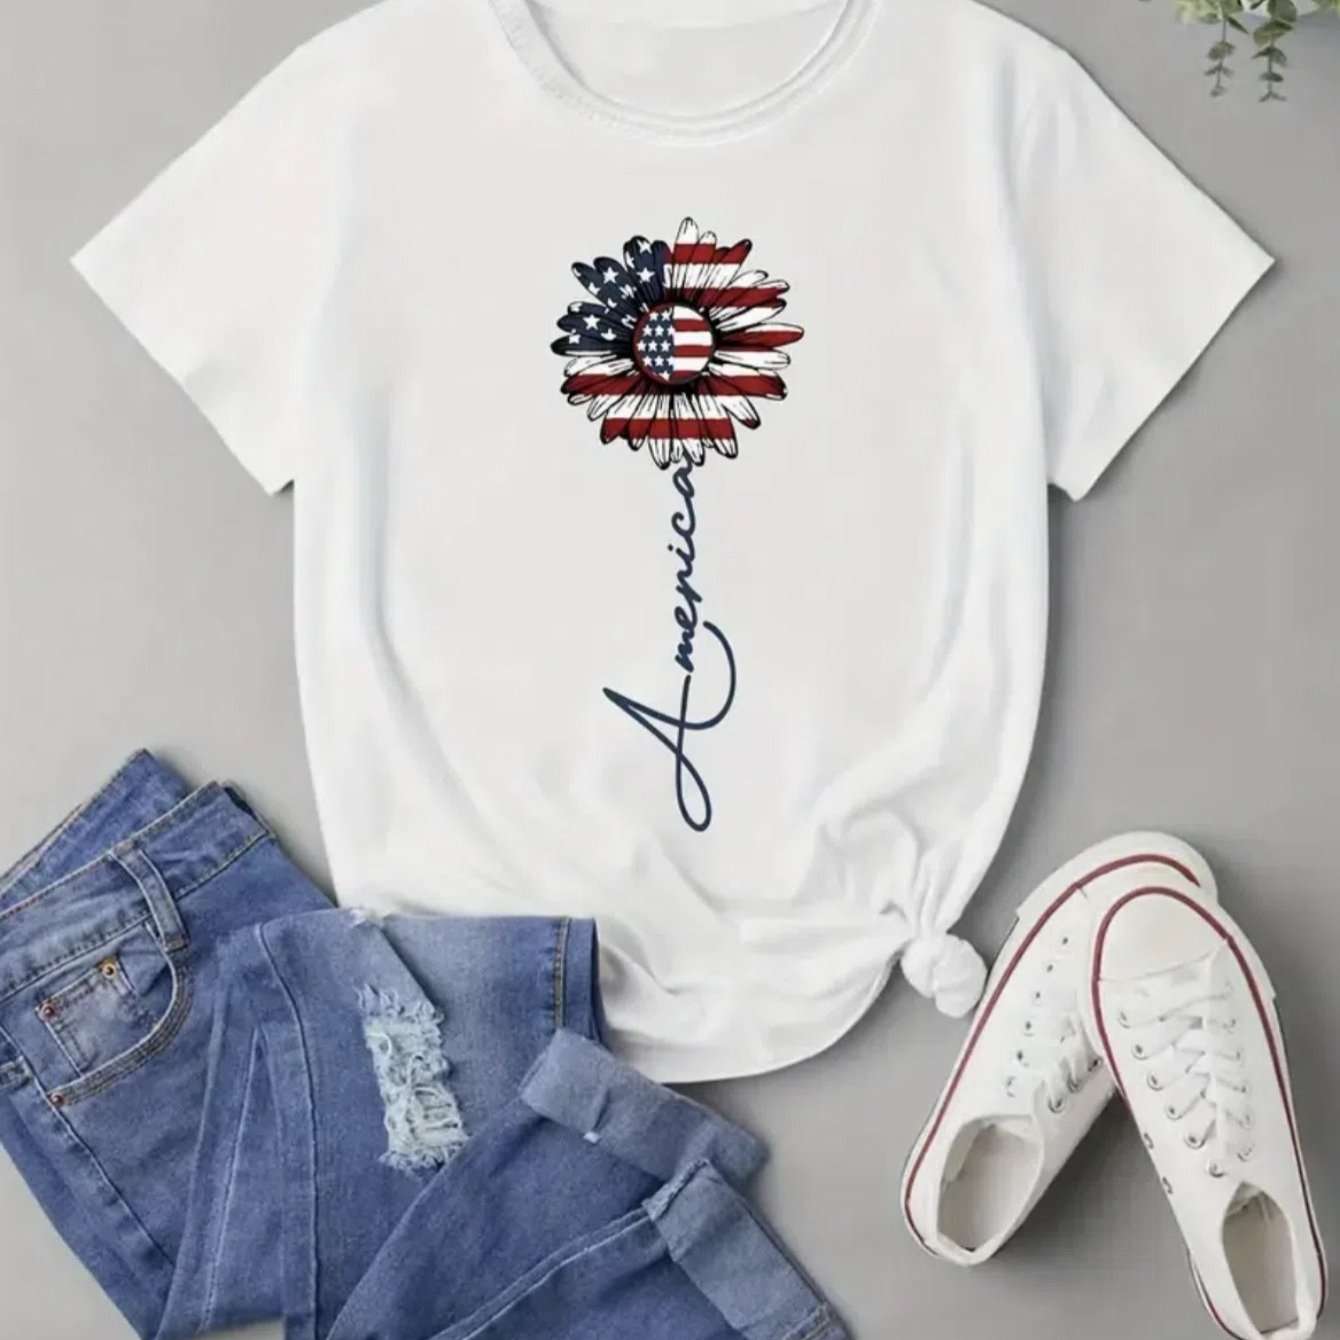 

Women's Chic American Flag Print Tee - Comfy, Casual Short Sleeve Crew Neck T-shirt For Everyday Wear & Stylish Layering